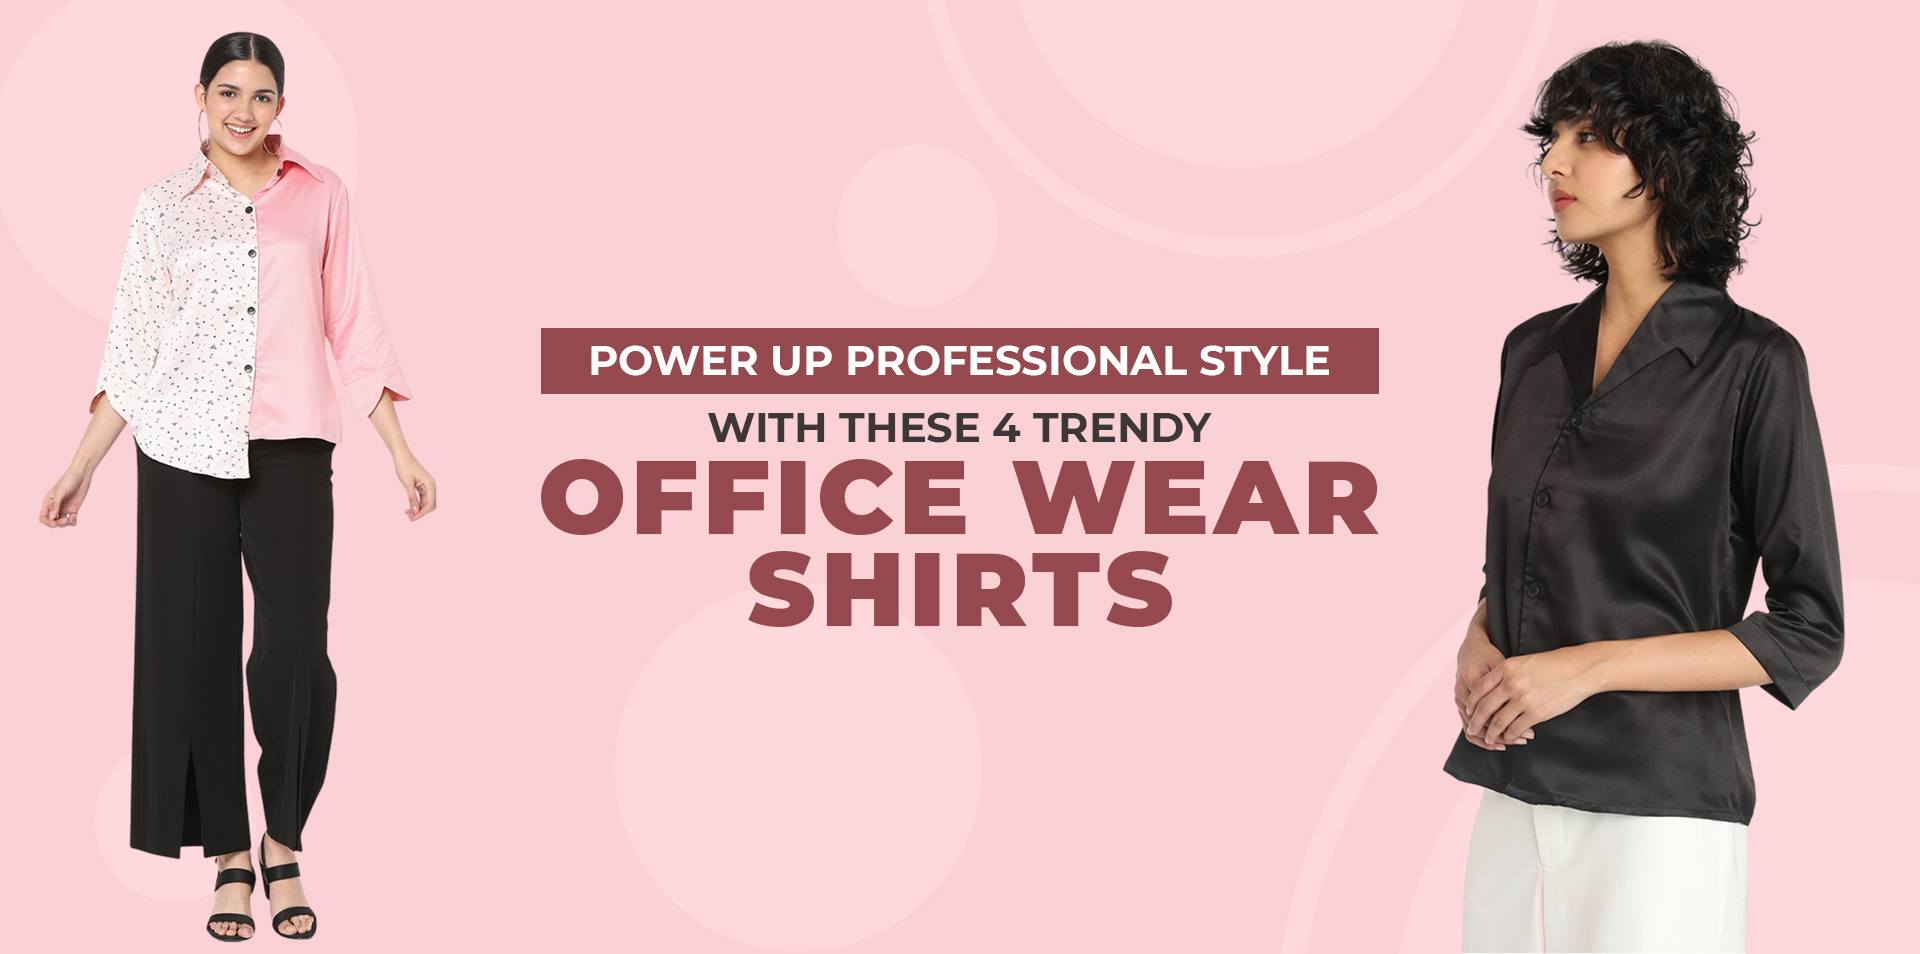 Power Up Professional Style with trendy Office Wear Shirts | Smarty Pants